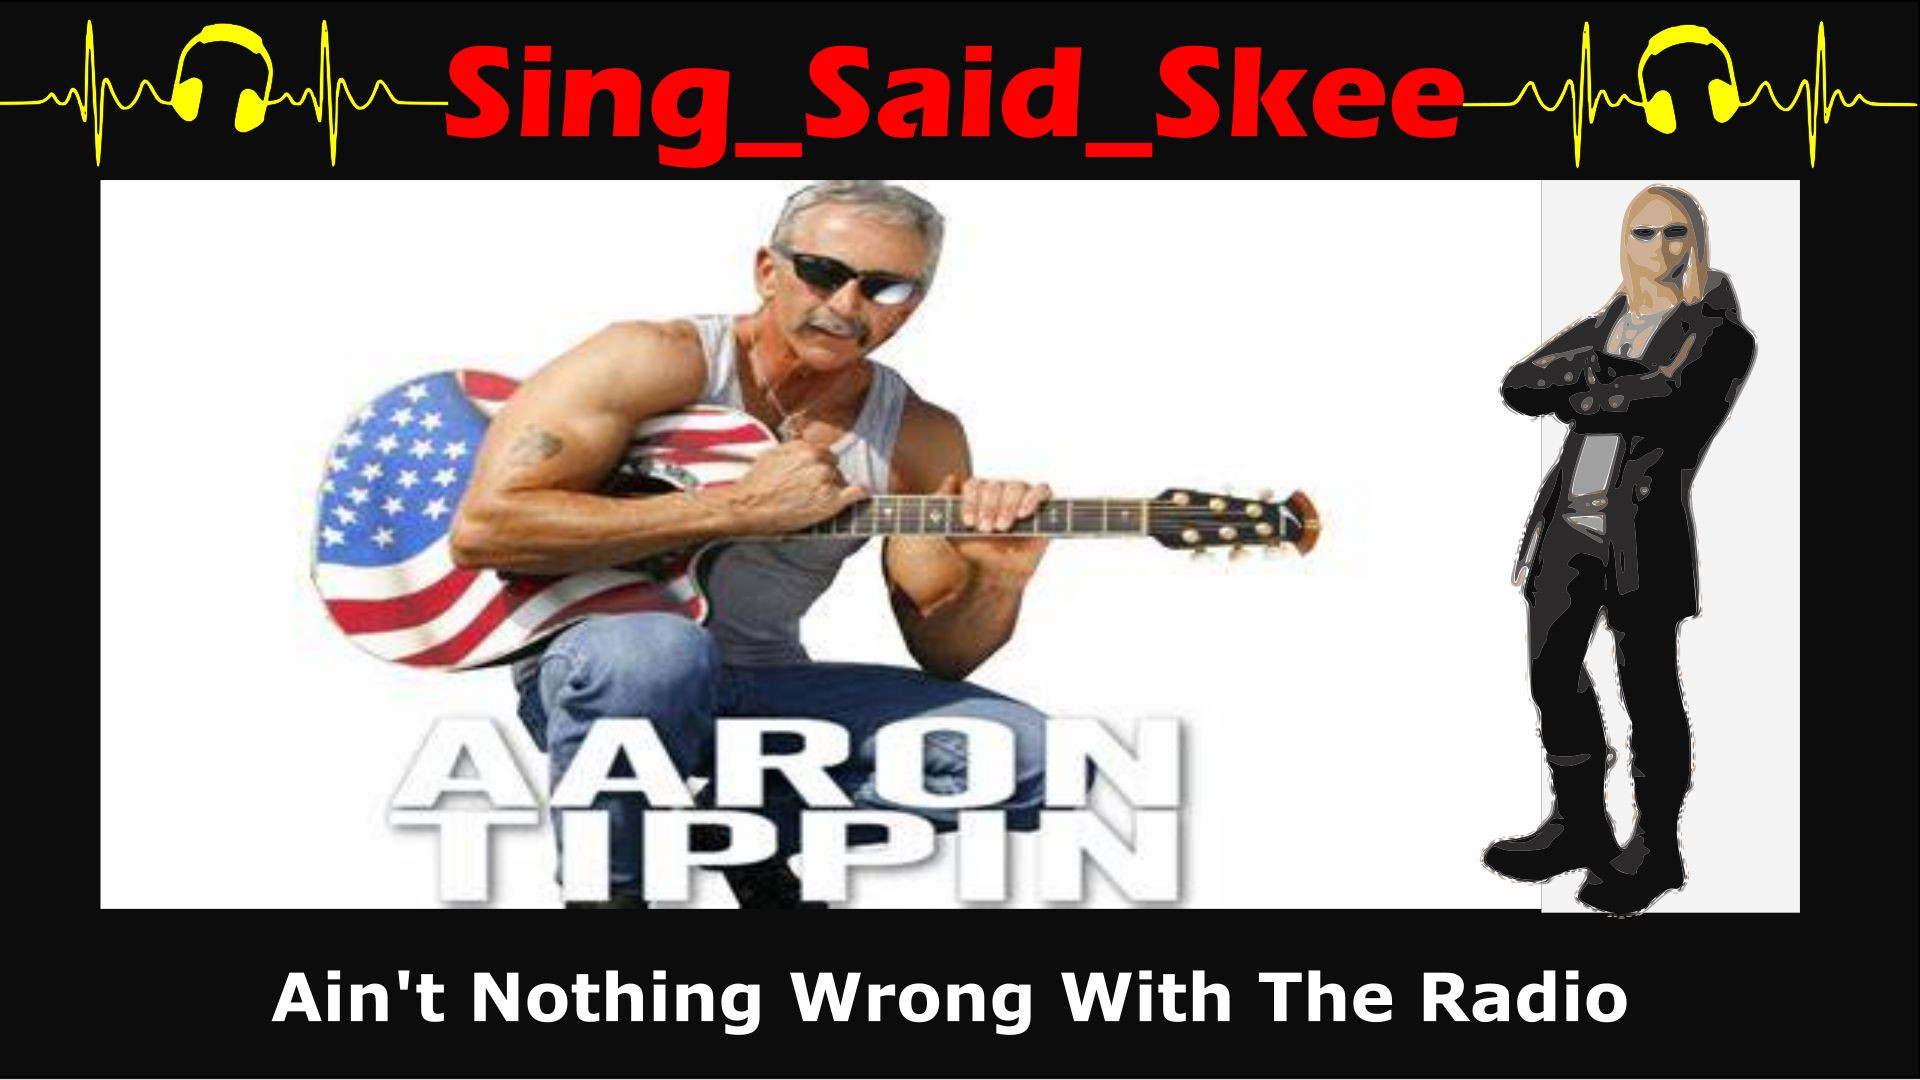 ⁣There Ain't Nothin' Wrong With The Radio - Aaron Tippin - Sing_Said_Skee